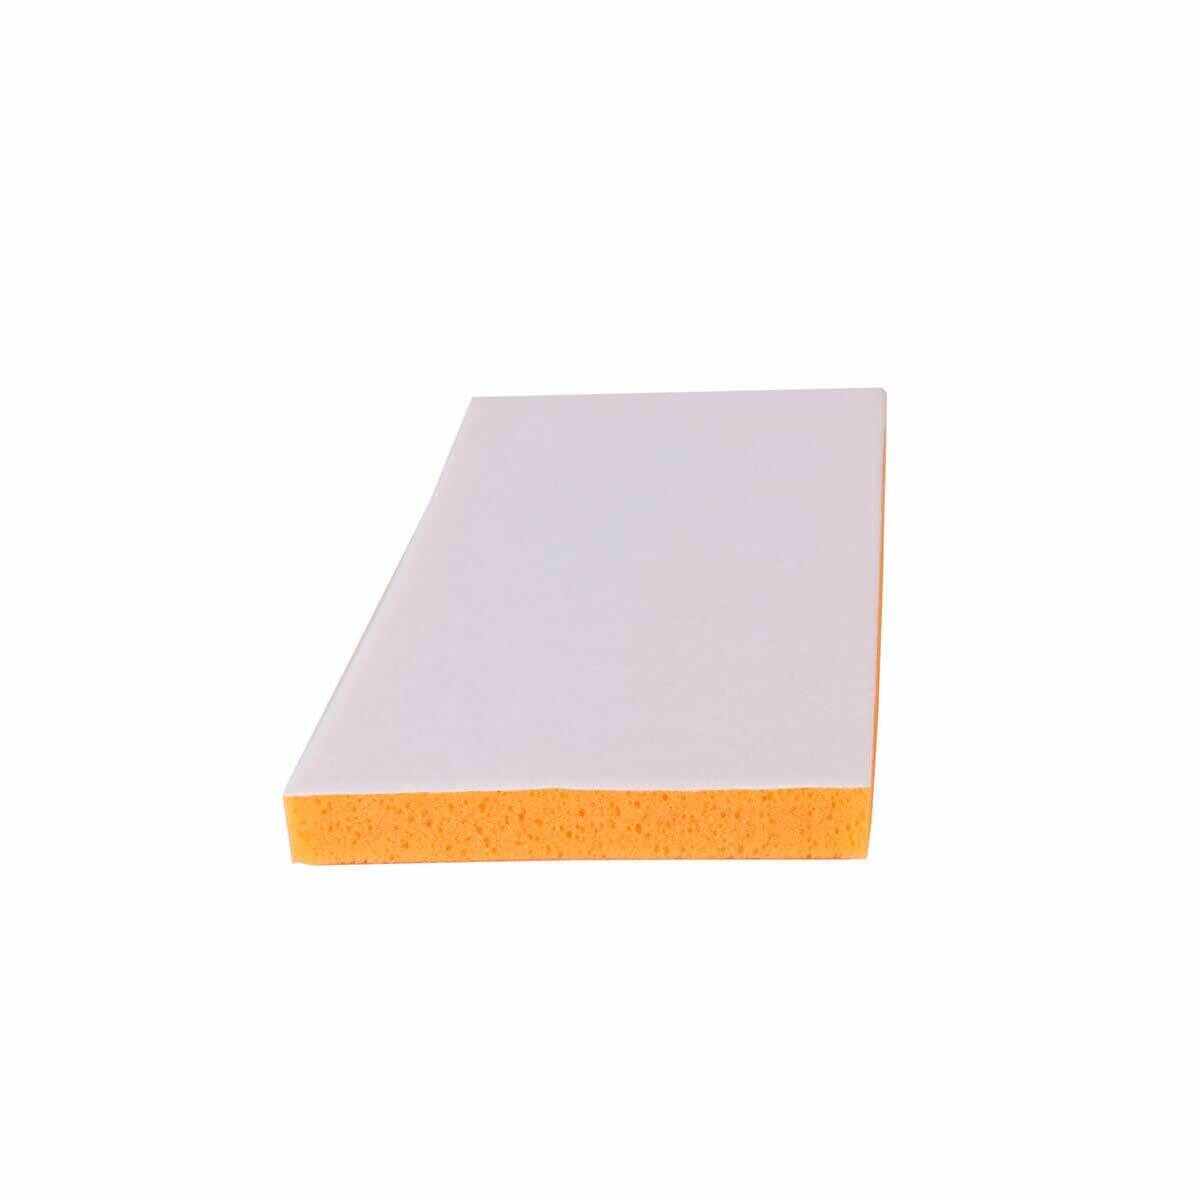 REPLACEMENT WALL SPONGE FOR BARWALT ULTRA GROUT CLENAING SY 11 X 5 1/2 X 1 QTY 6 